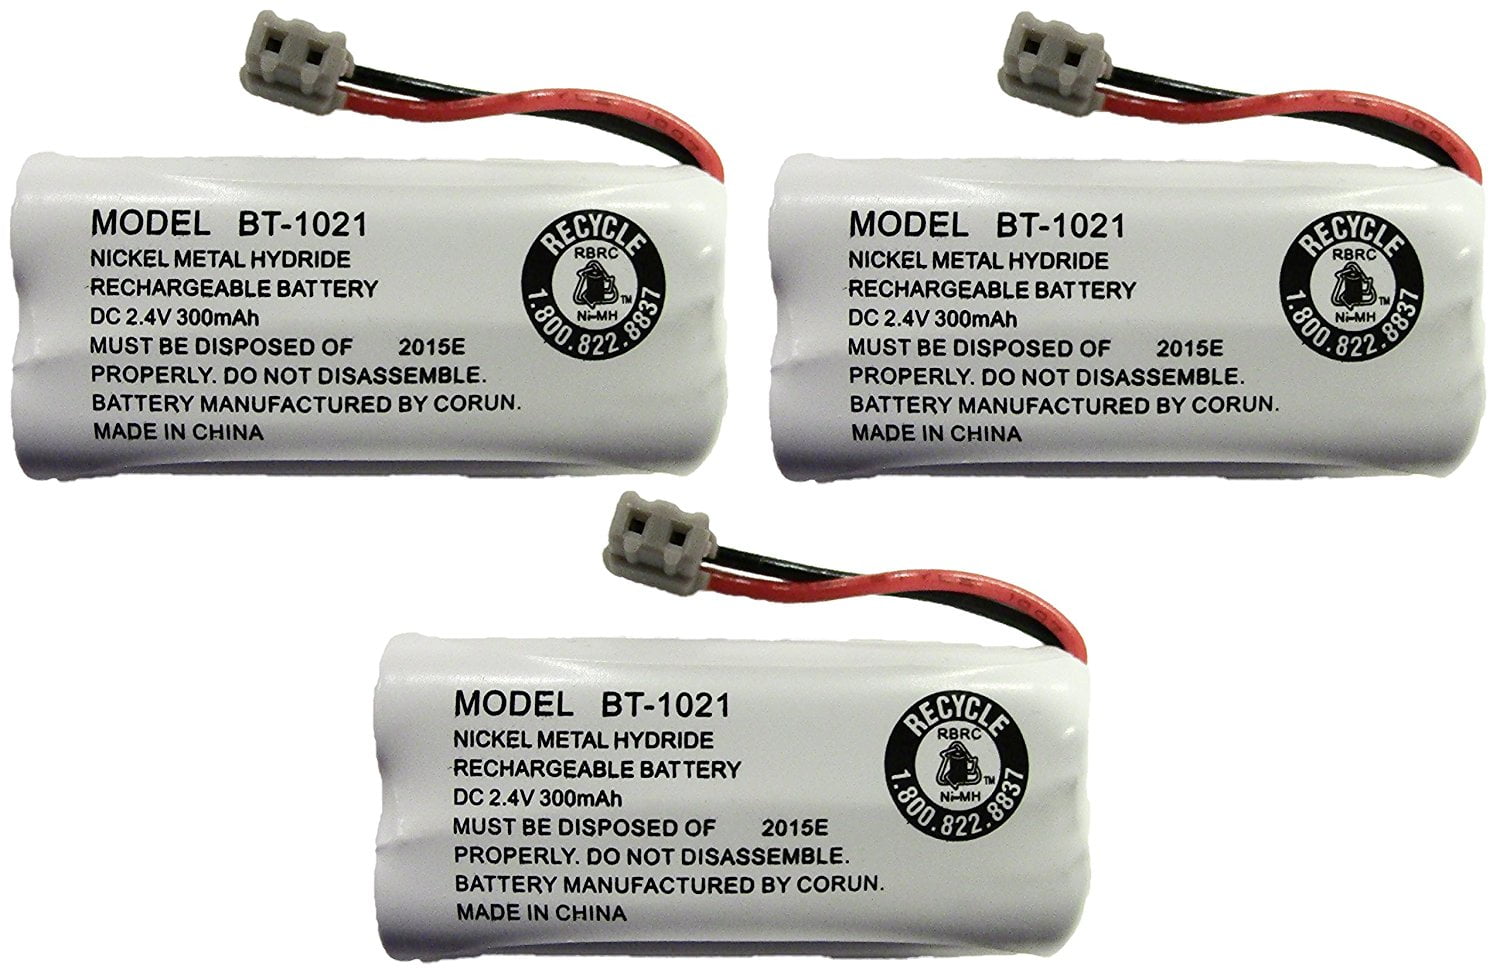 BT-1021 Rechargeable Battery Replacement Compatible with Uniden BT1021 BBTG0798001 BT-1008 BT-1016 Cordless Handset Phone Pack of 4 